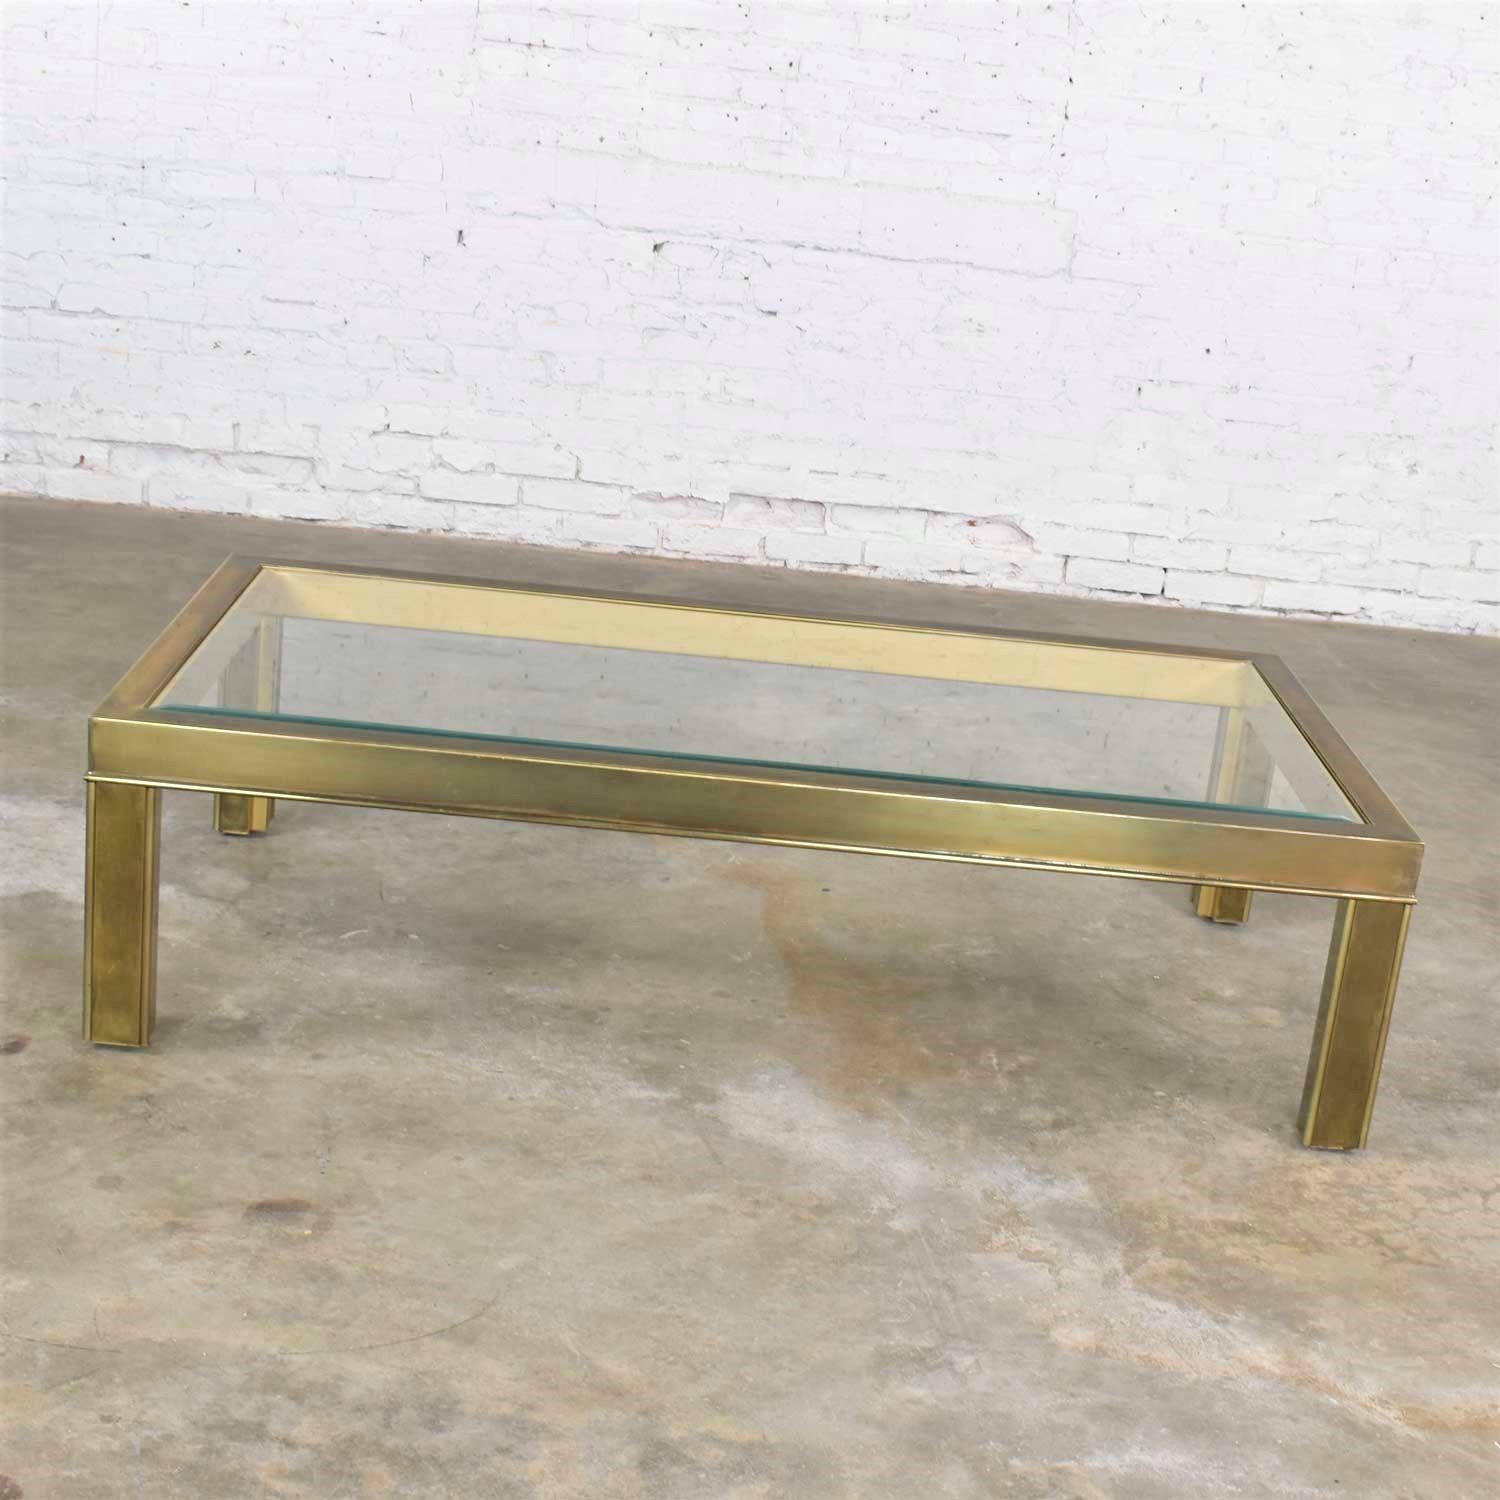 Handsome large modern brass and glass parsons’ style coffee table or cocktail table in the style of Mastercraft. It is in wonderful vintage condition. The brass has a nice aged patina which we love. The glass may have small scratches but nothing